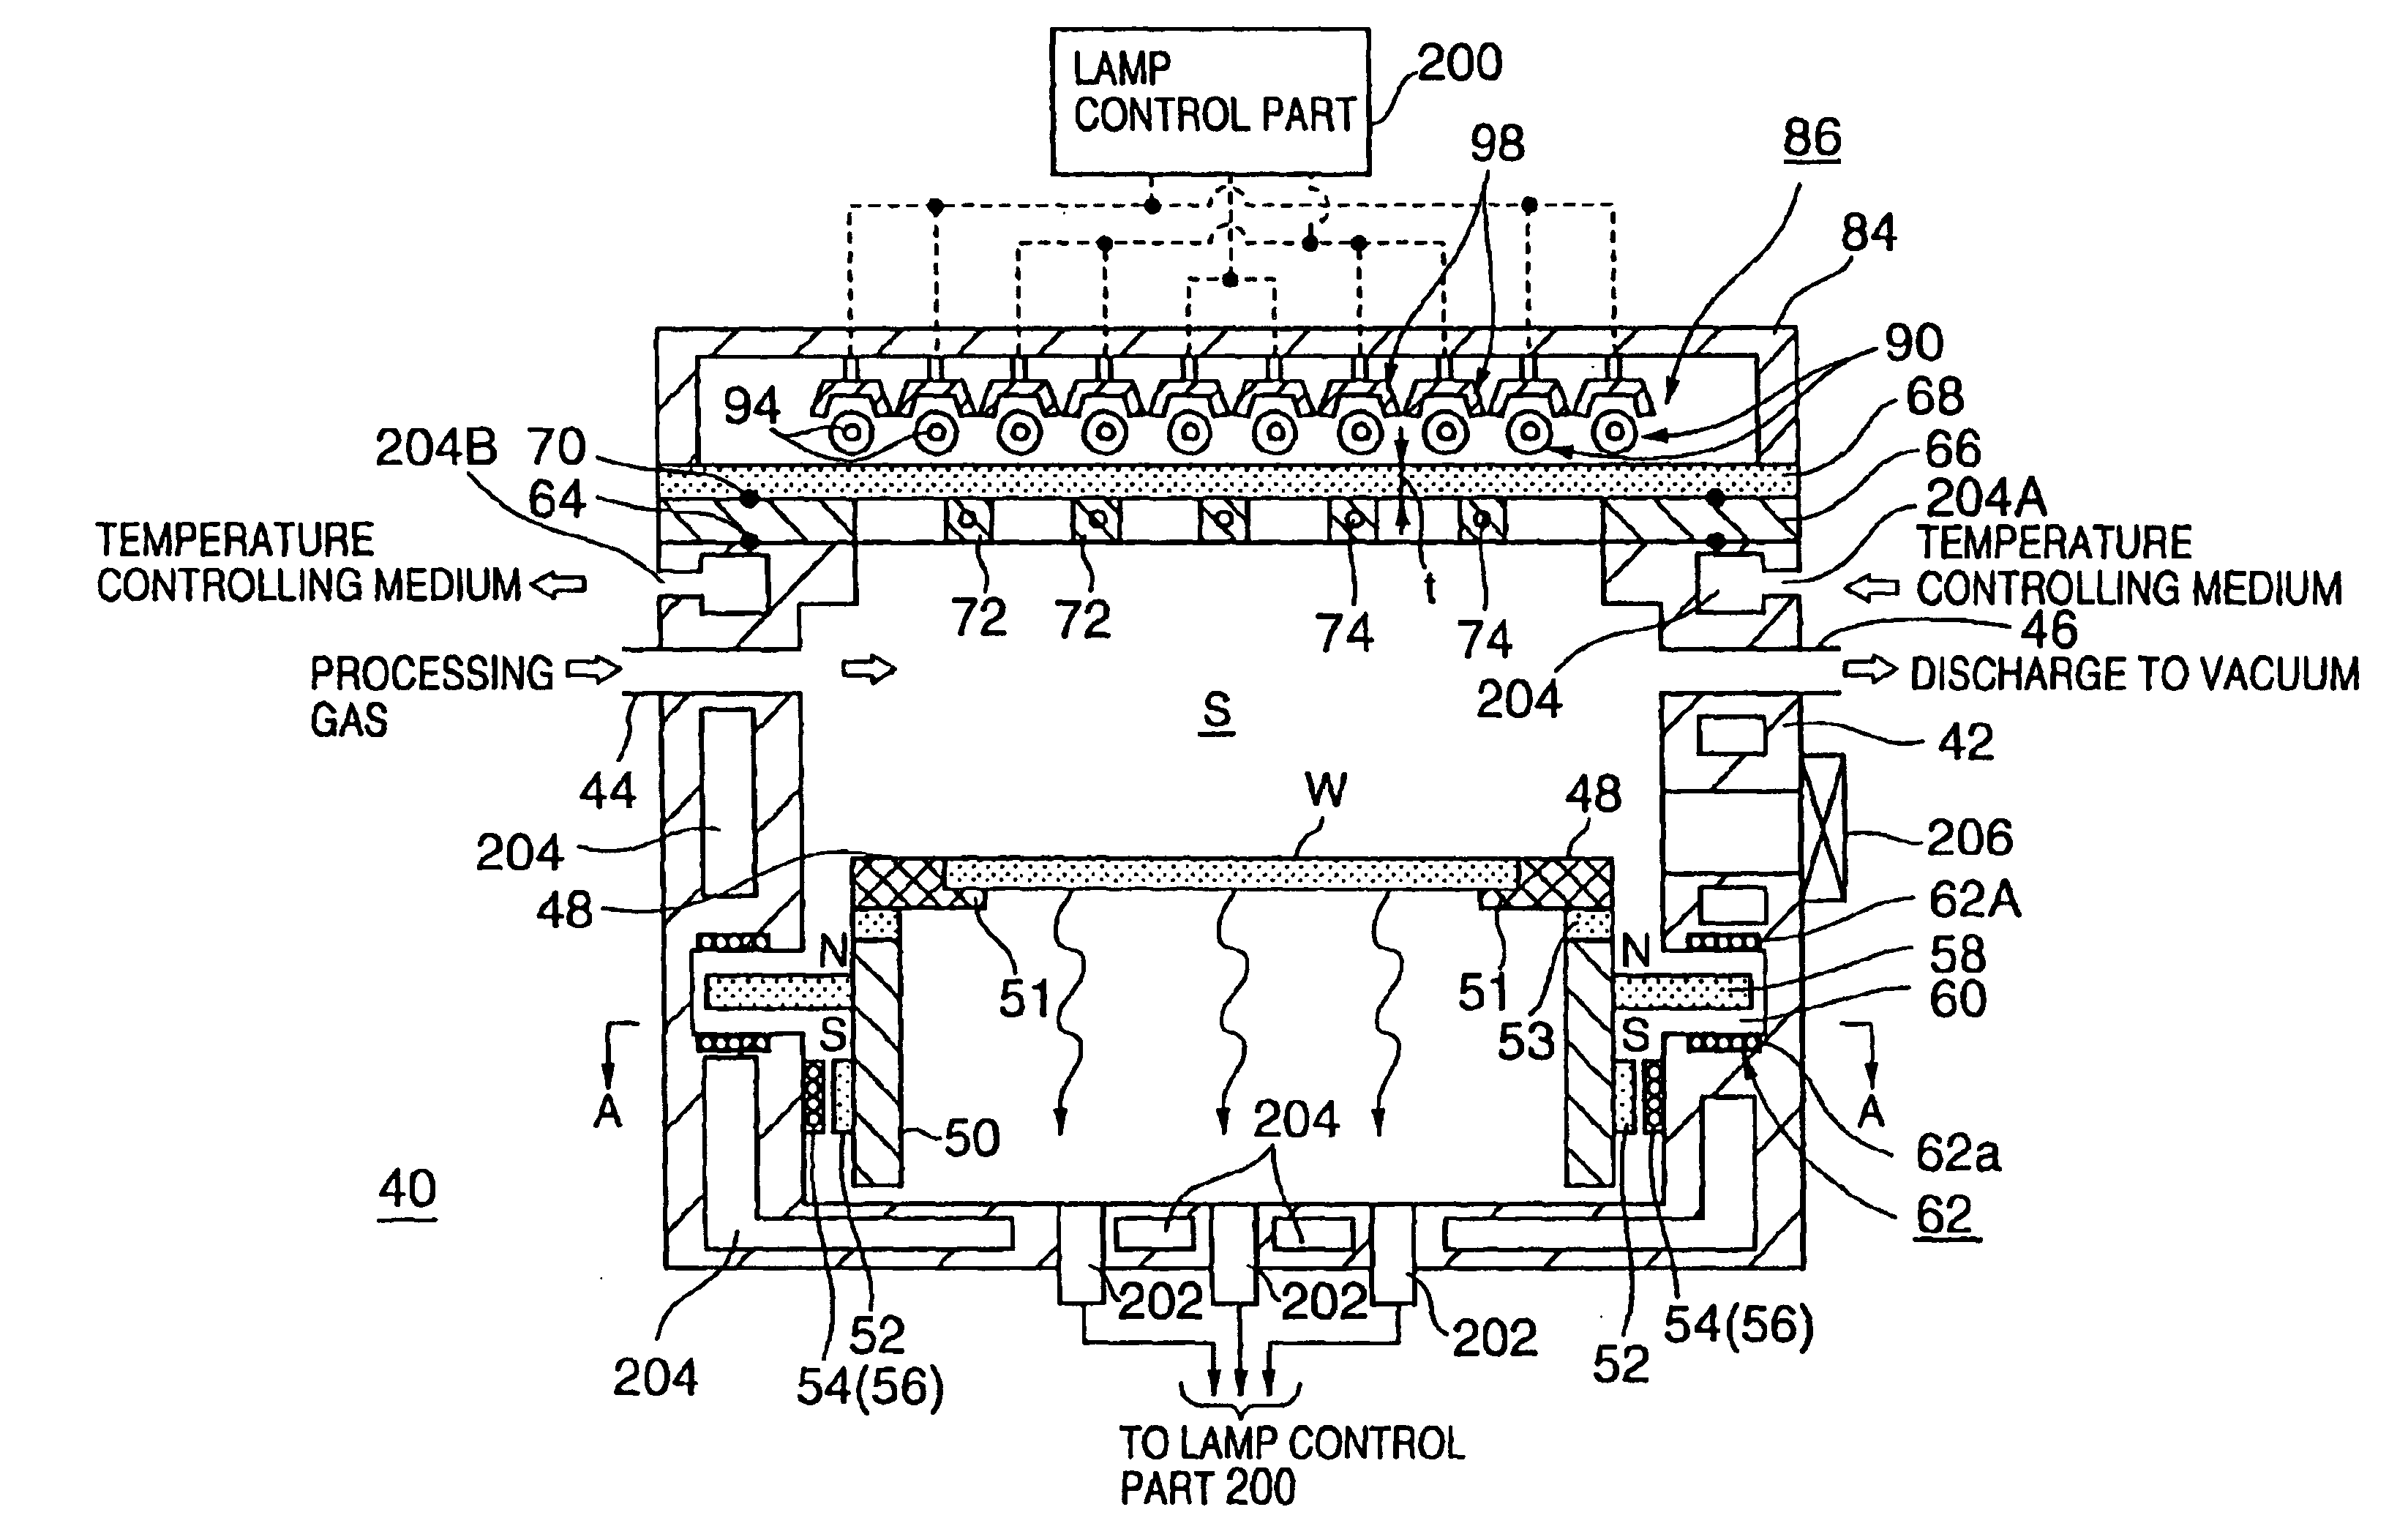 Thermal processing system